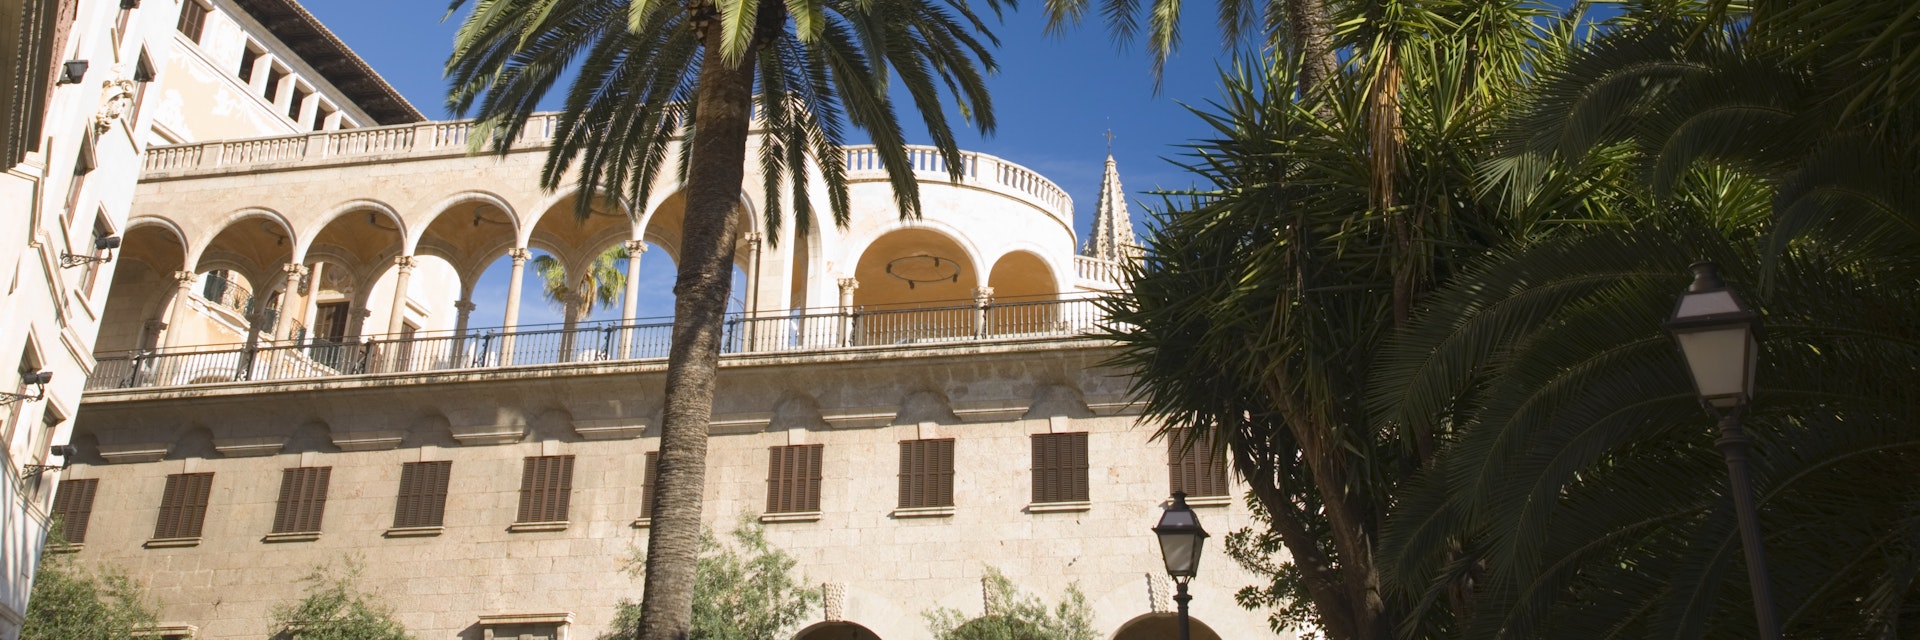 Palau March, a private palace now used as a modern art gallery, with palm trees in foreground.